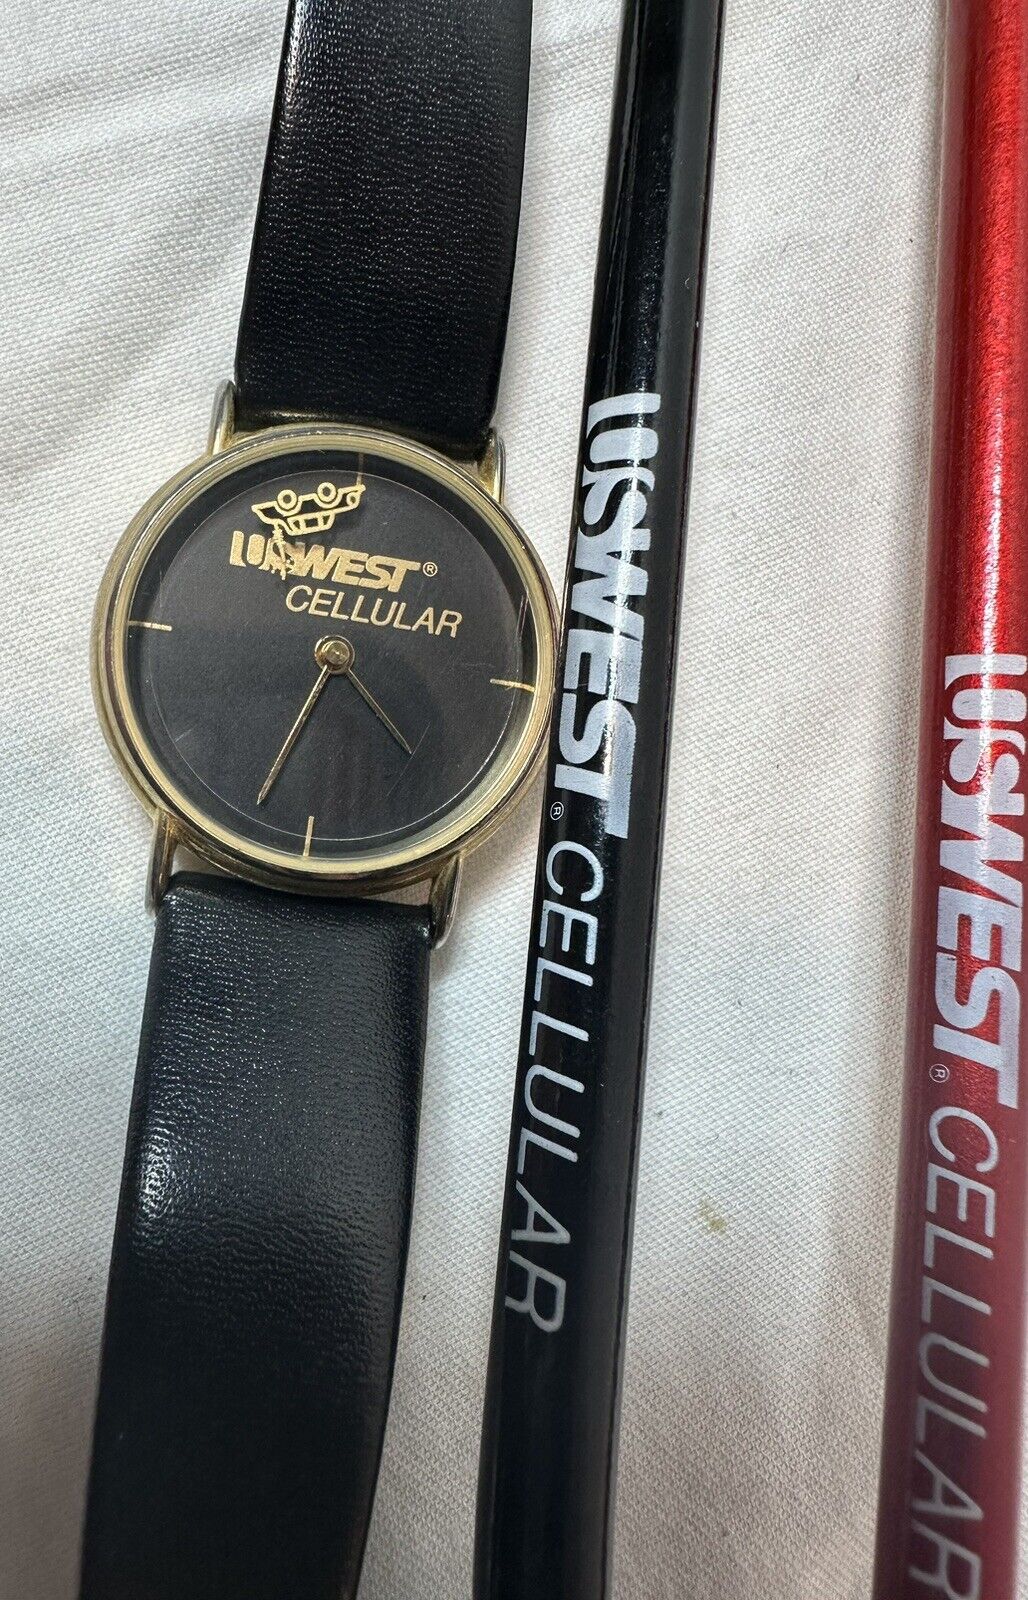 VERY RARE, Early 90’s, US West Cellular Watch w/Moving Car, & Curly Q Pencils